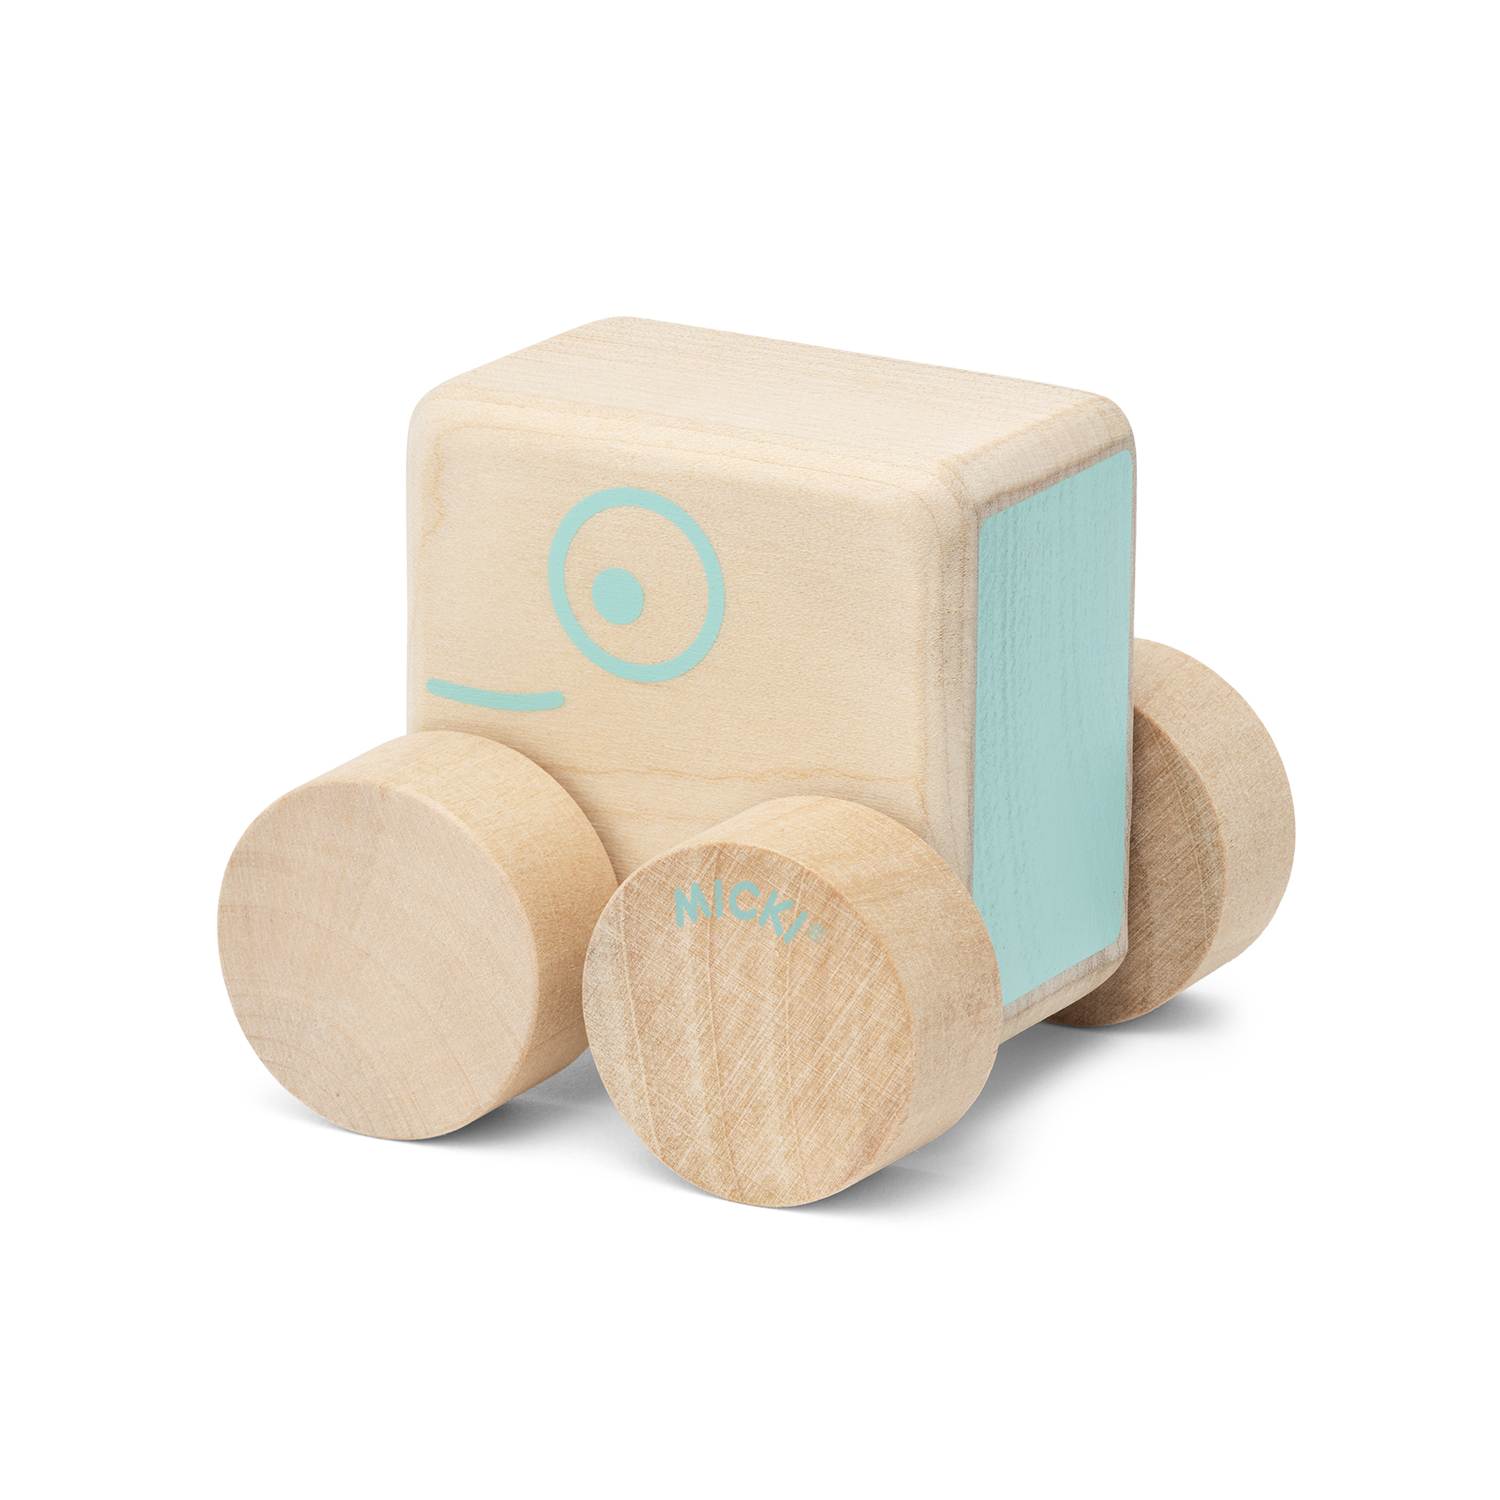 Wooden toys micki toy car square natural wood